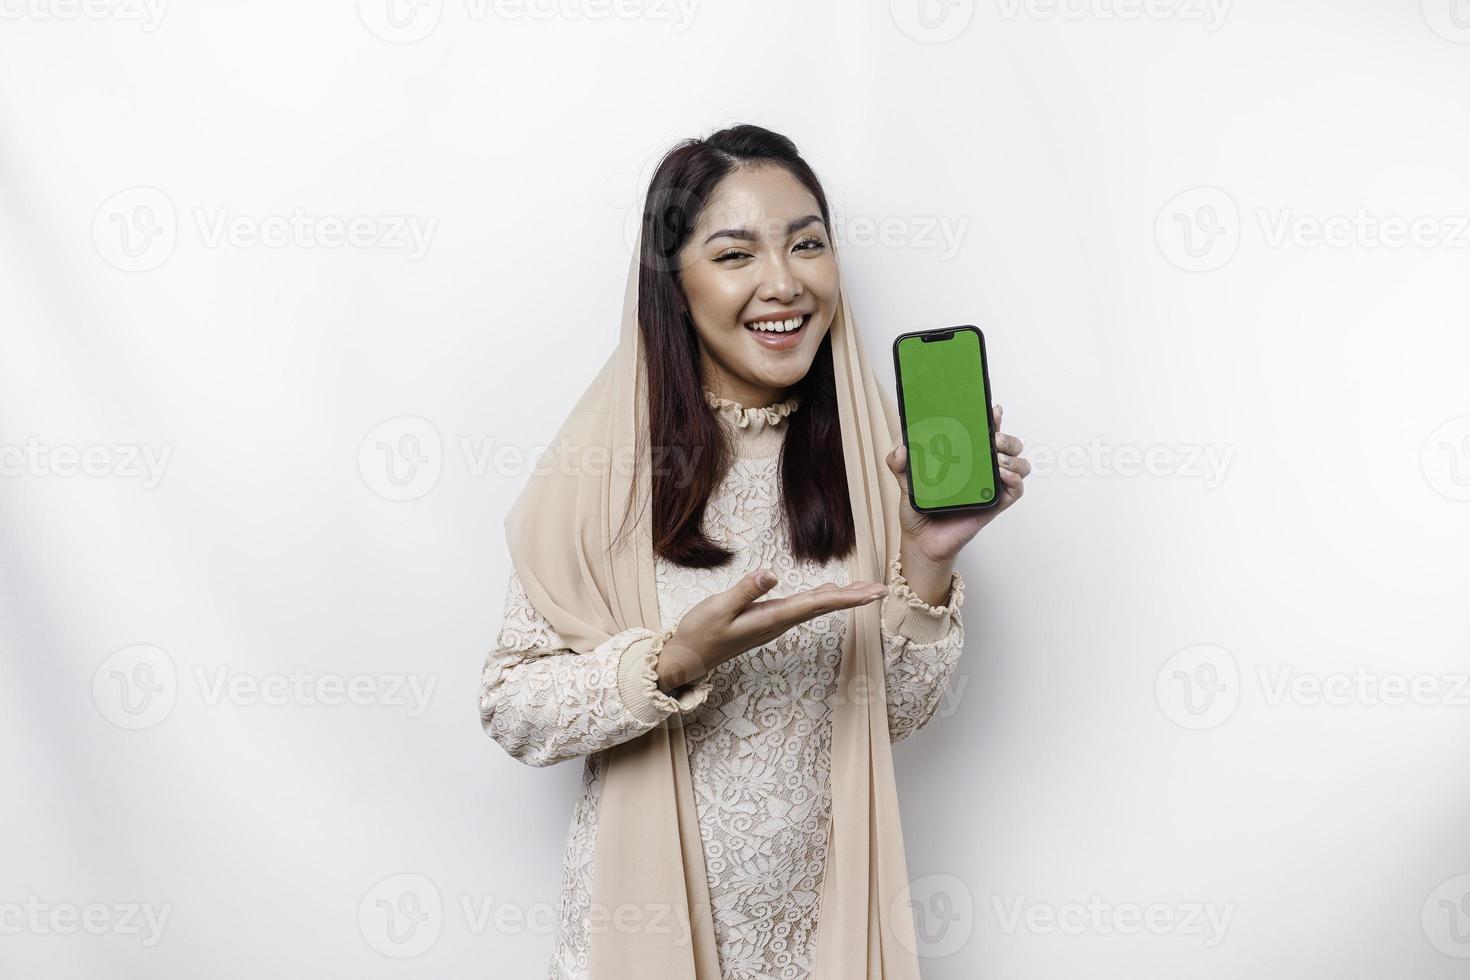 A portrait of a happy Asian Muslim woman wearing a headscarf, showing her phone screen, isolated by white background photo